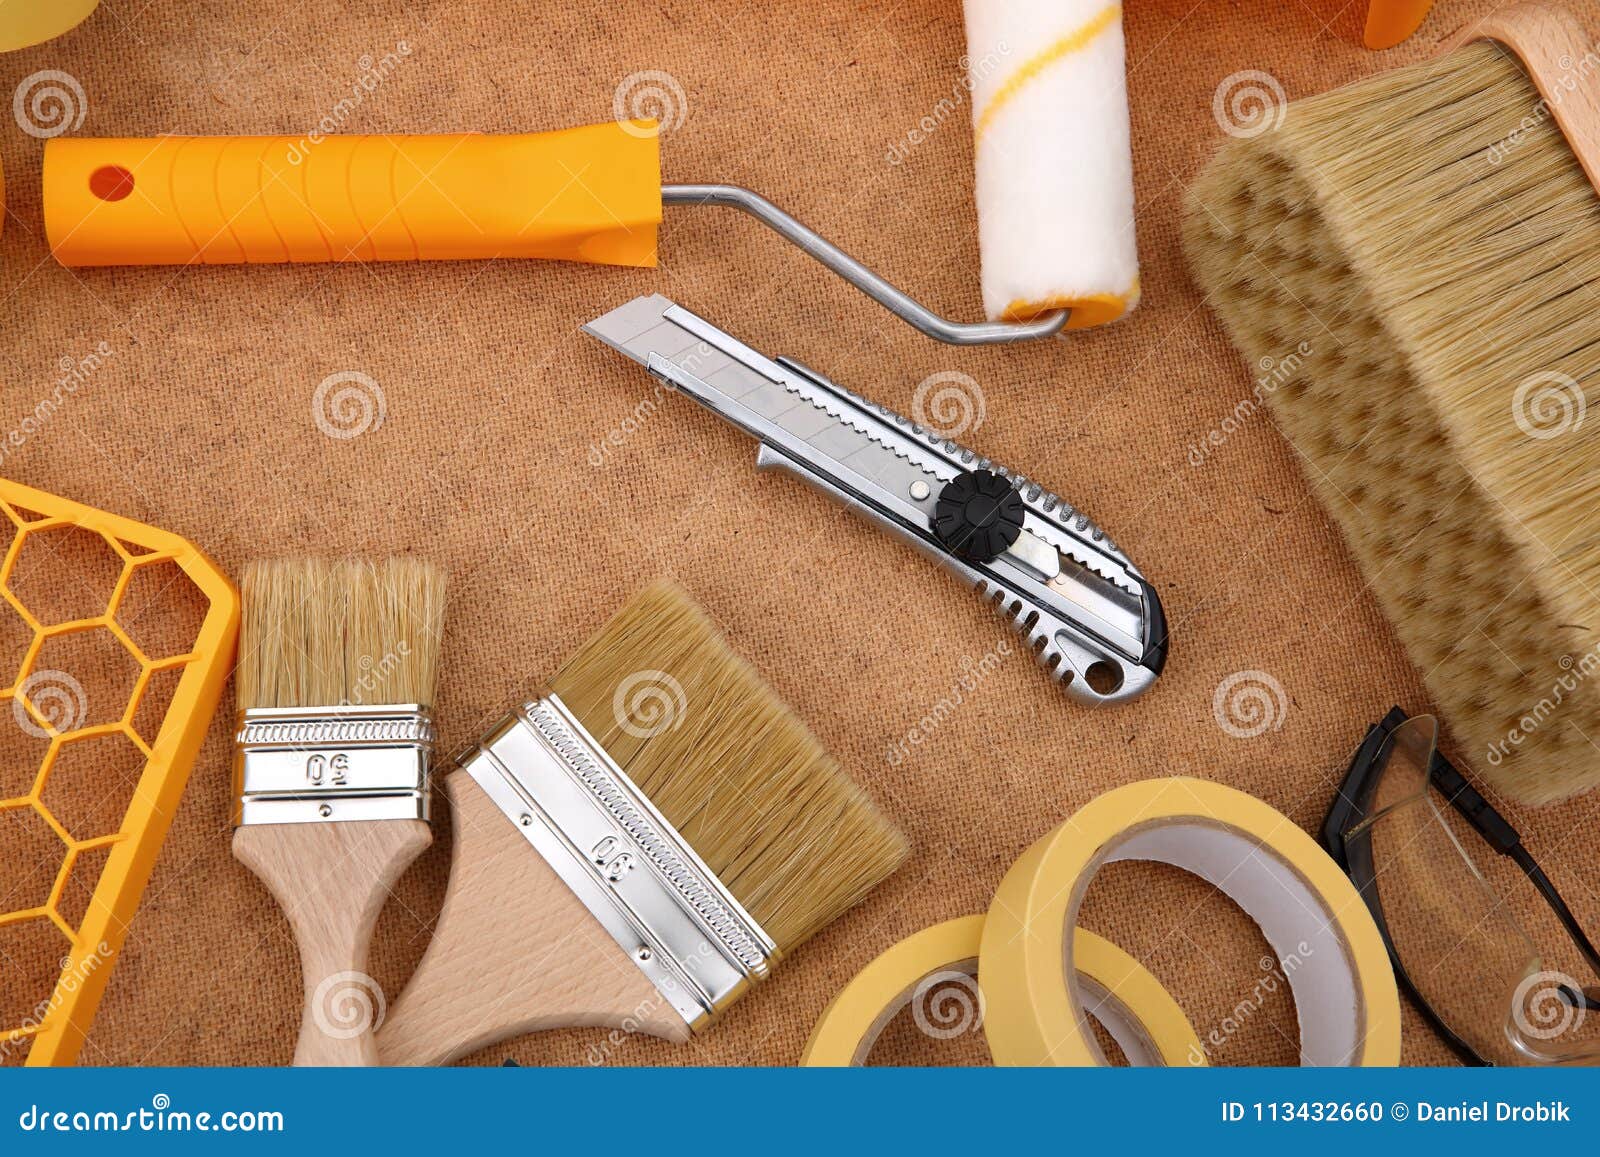 A Collection of Painting Tools Ready for Use for Hobbyist and ...